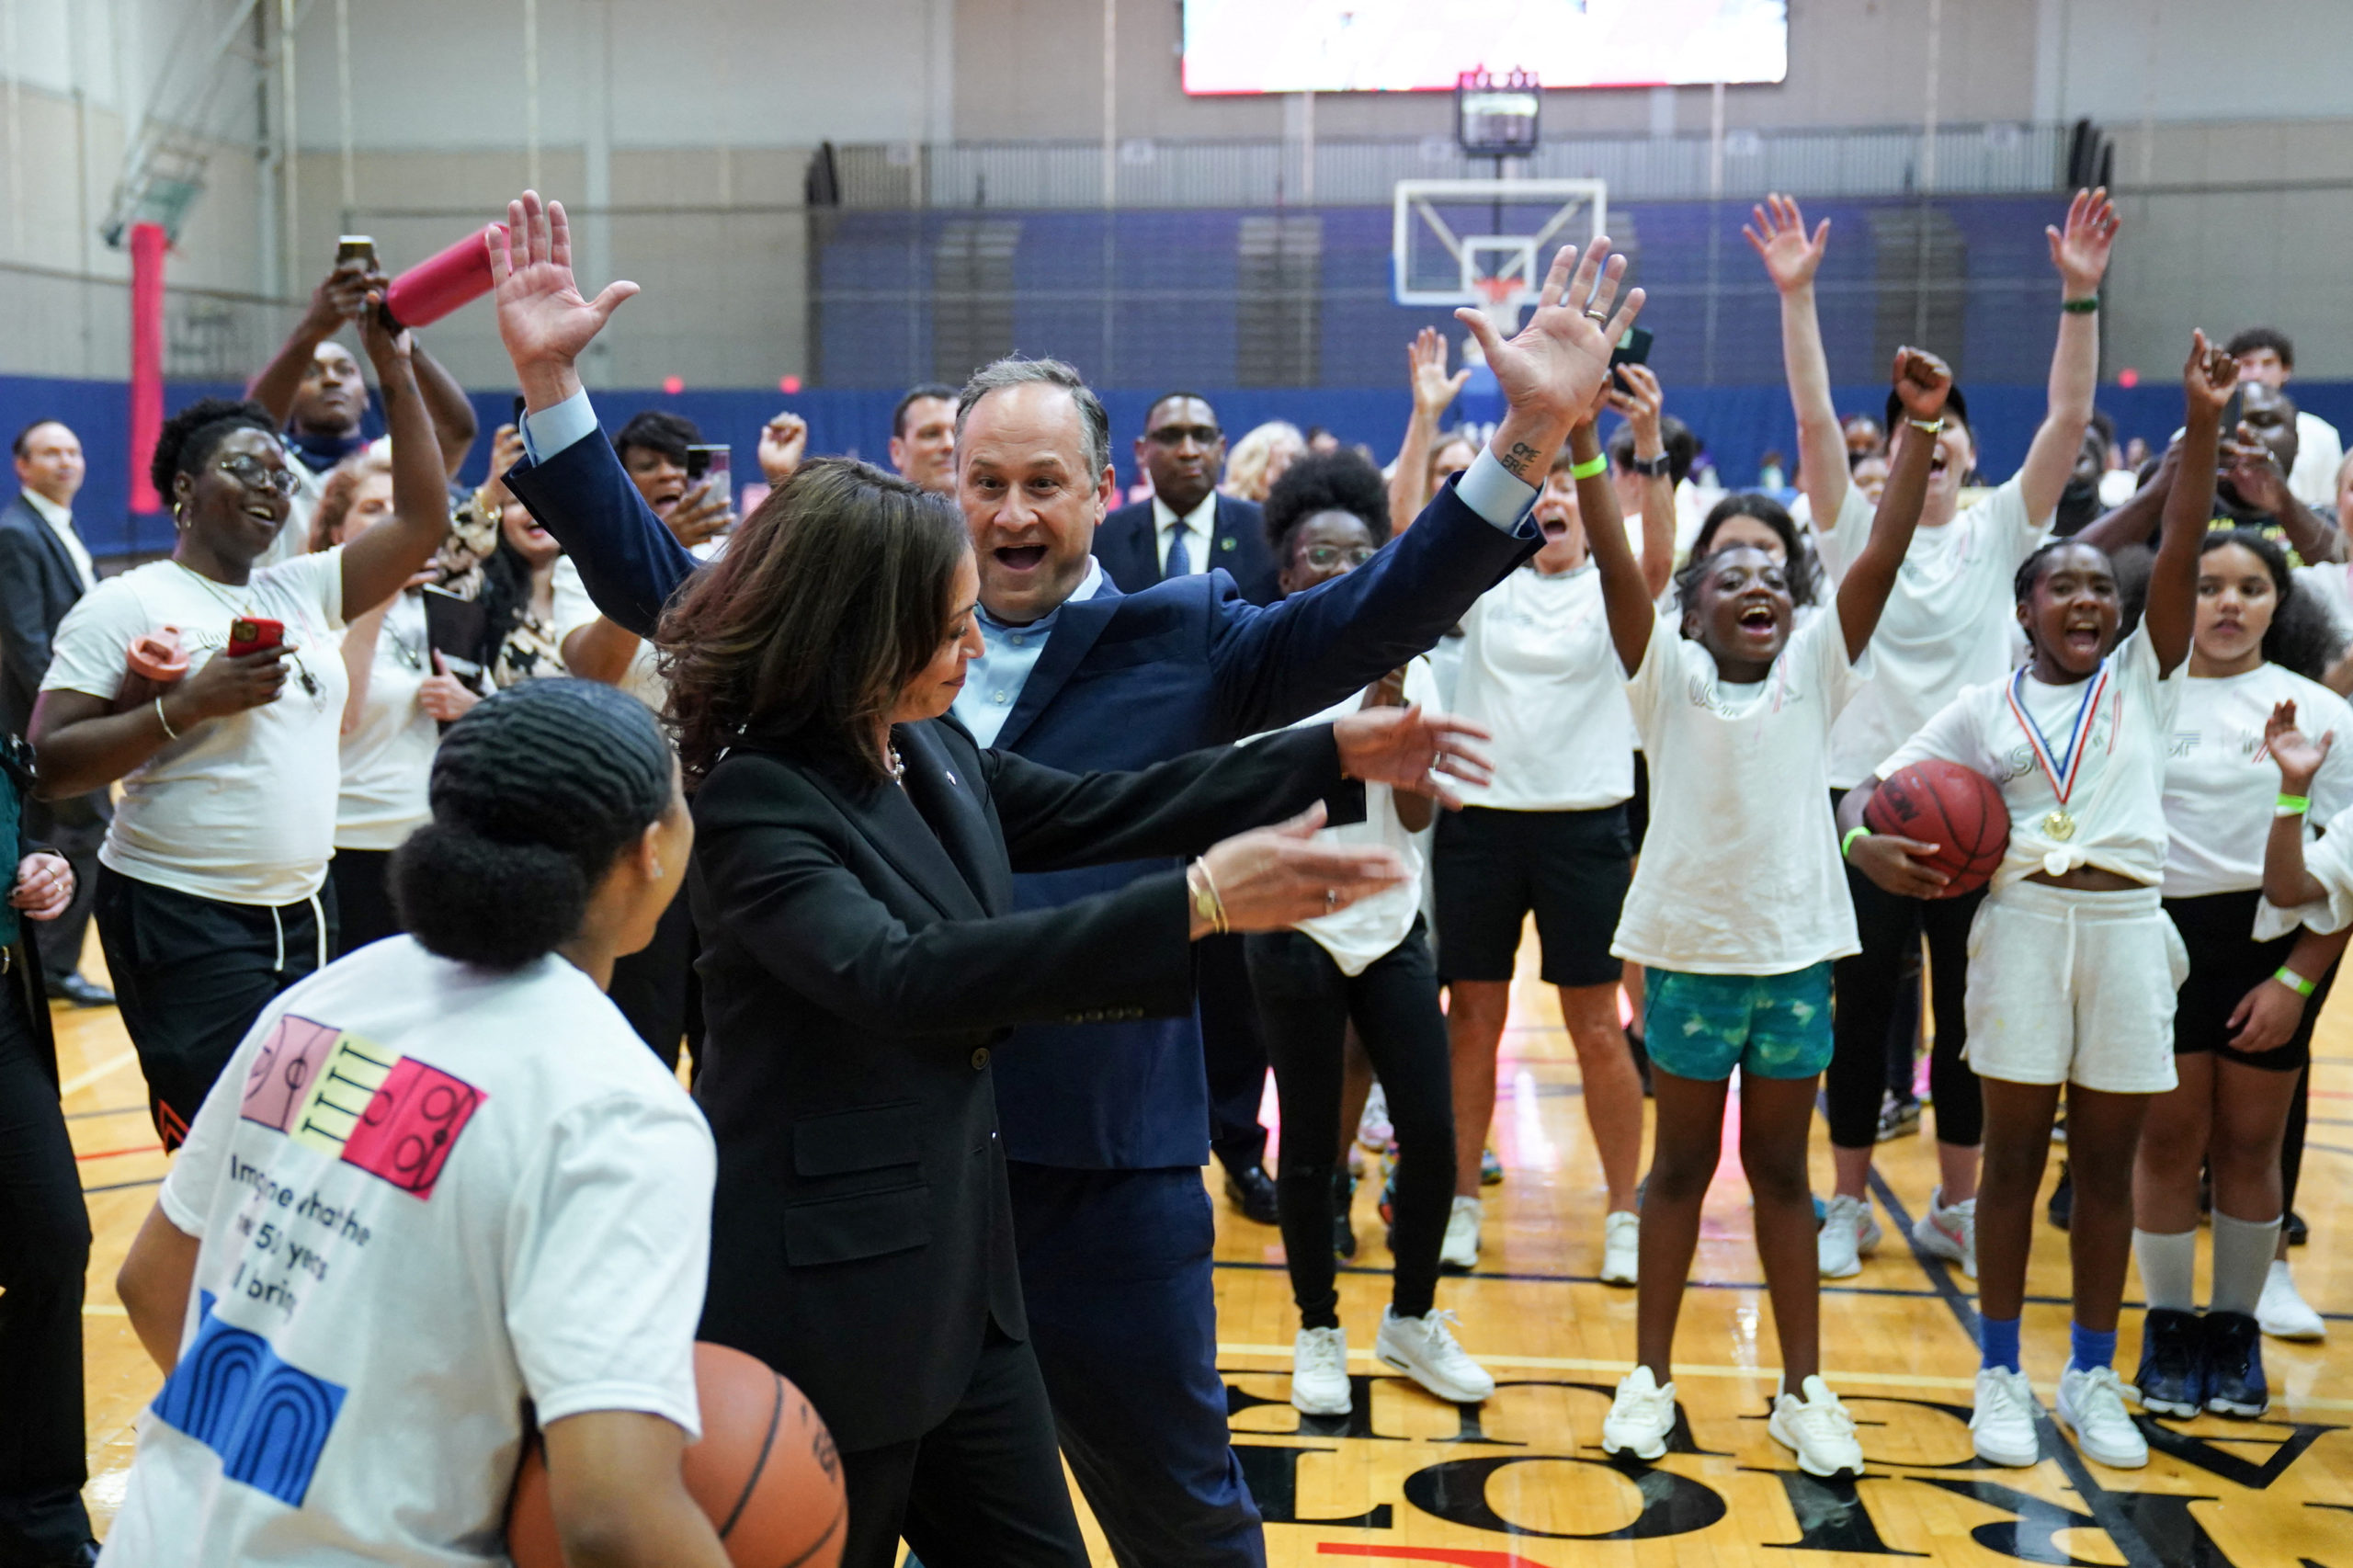 U.S. Vice President Kamala Harris and Second Gentleman Doug Emhoff celebrate after Harris made a successful basket while throwing basketballs with students during the Title IX 50th anniversary field day event at American University in Washington, D.C., U.S., June 22, 2022. REUTERS/Sarah Silbiger